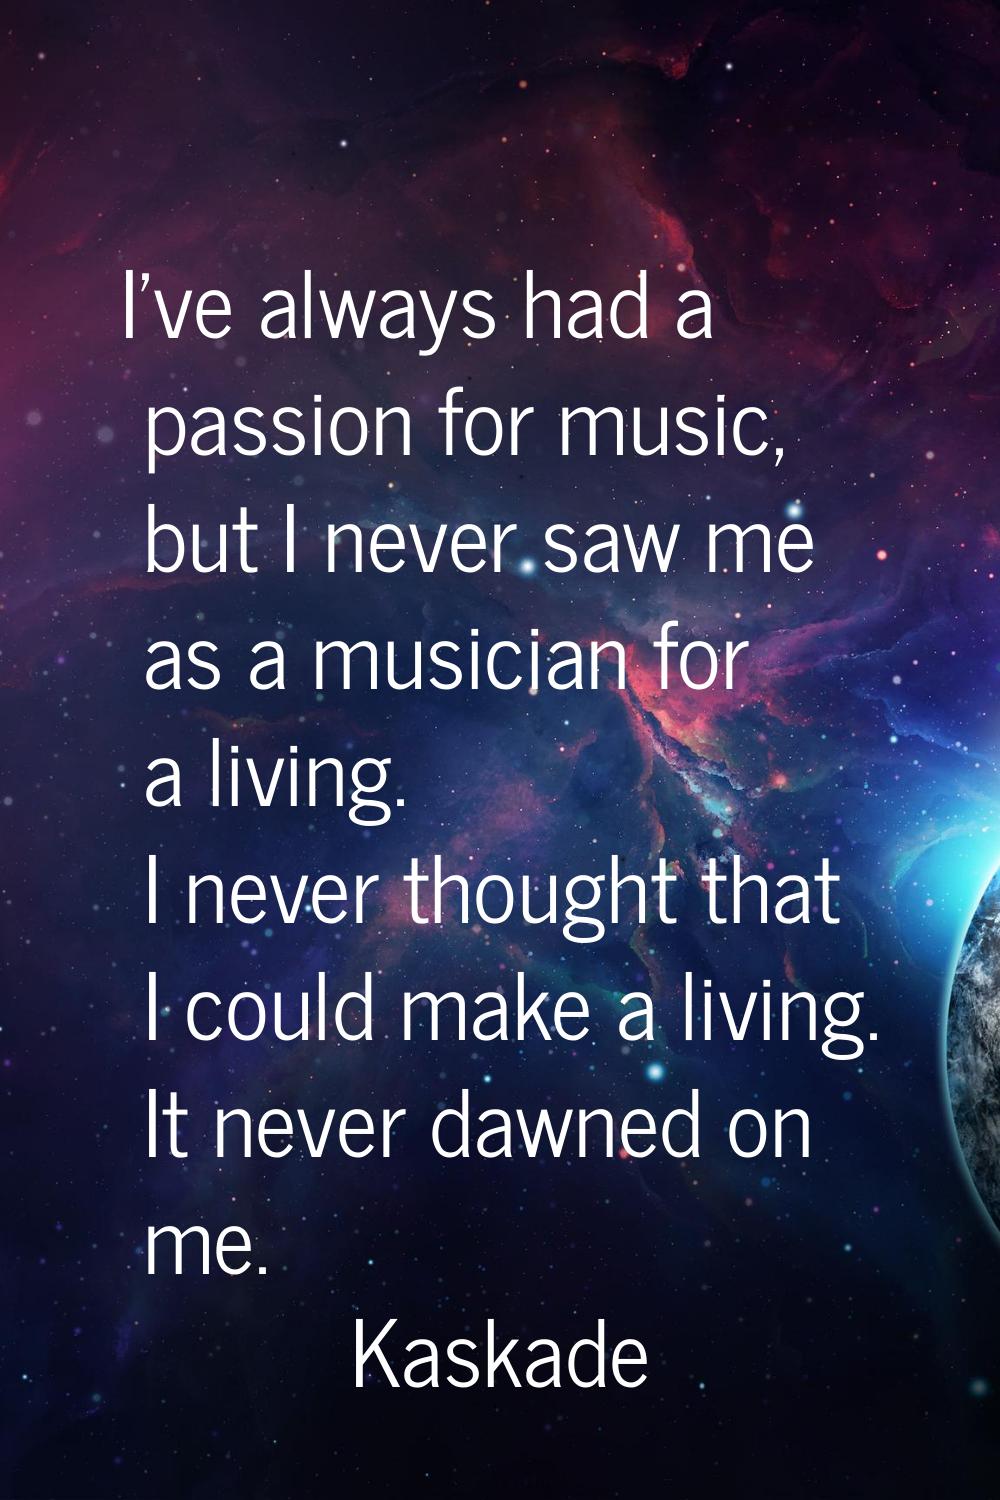 I've always had a passion for music, but I never saw me as a musician for a living. I never thought